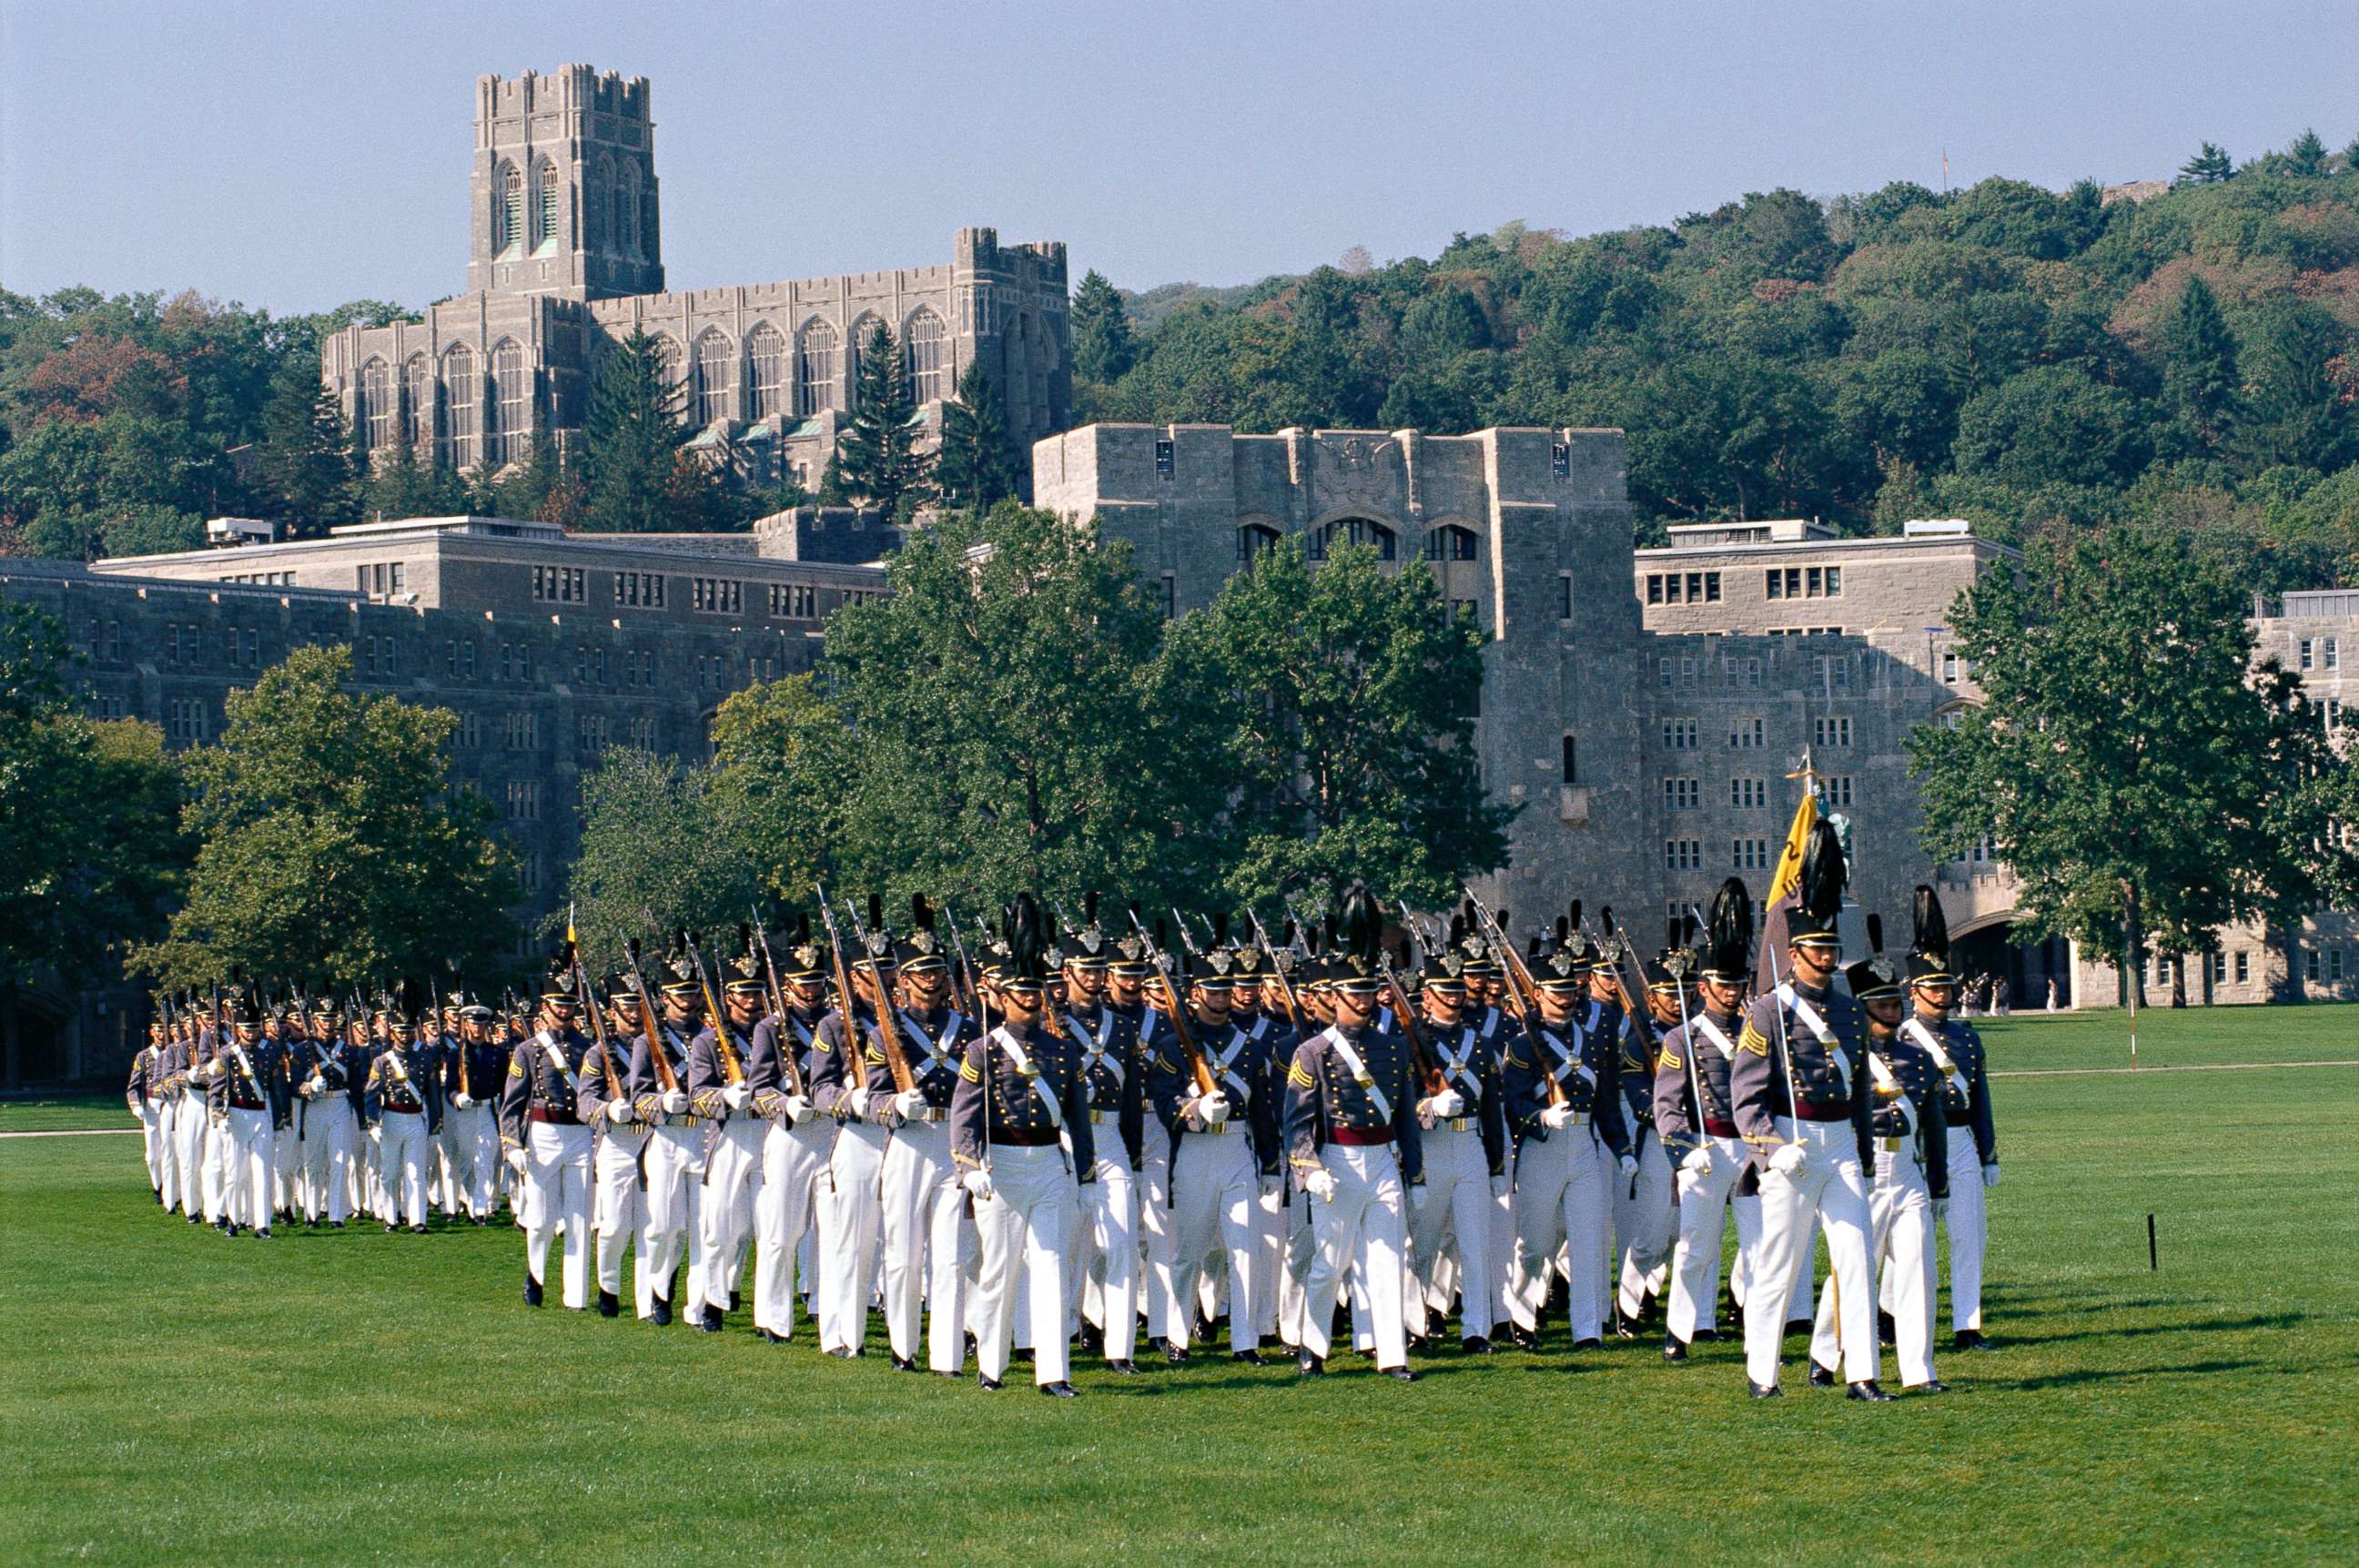 PHOTO: Members of the honor guard of the United States Military Academy at West Point march in formation along an athletic field.